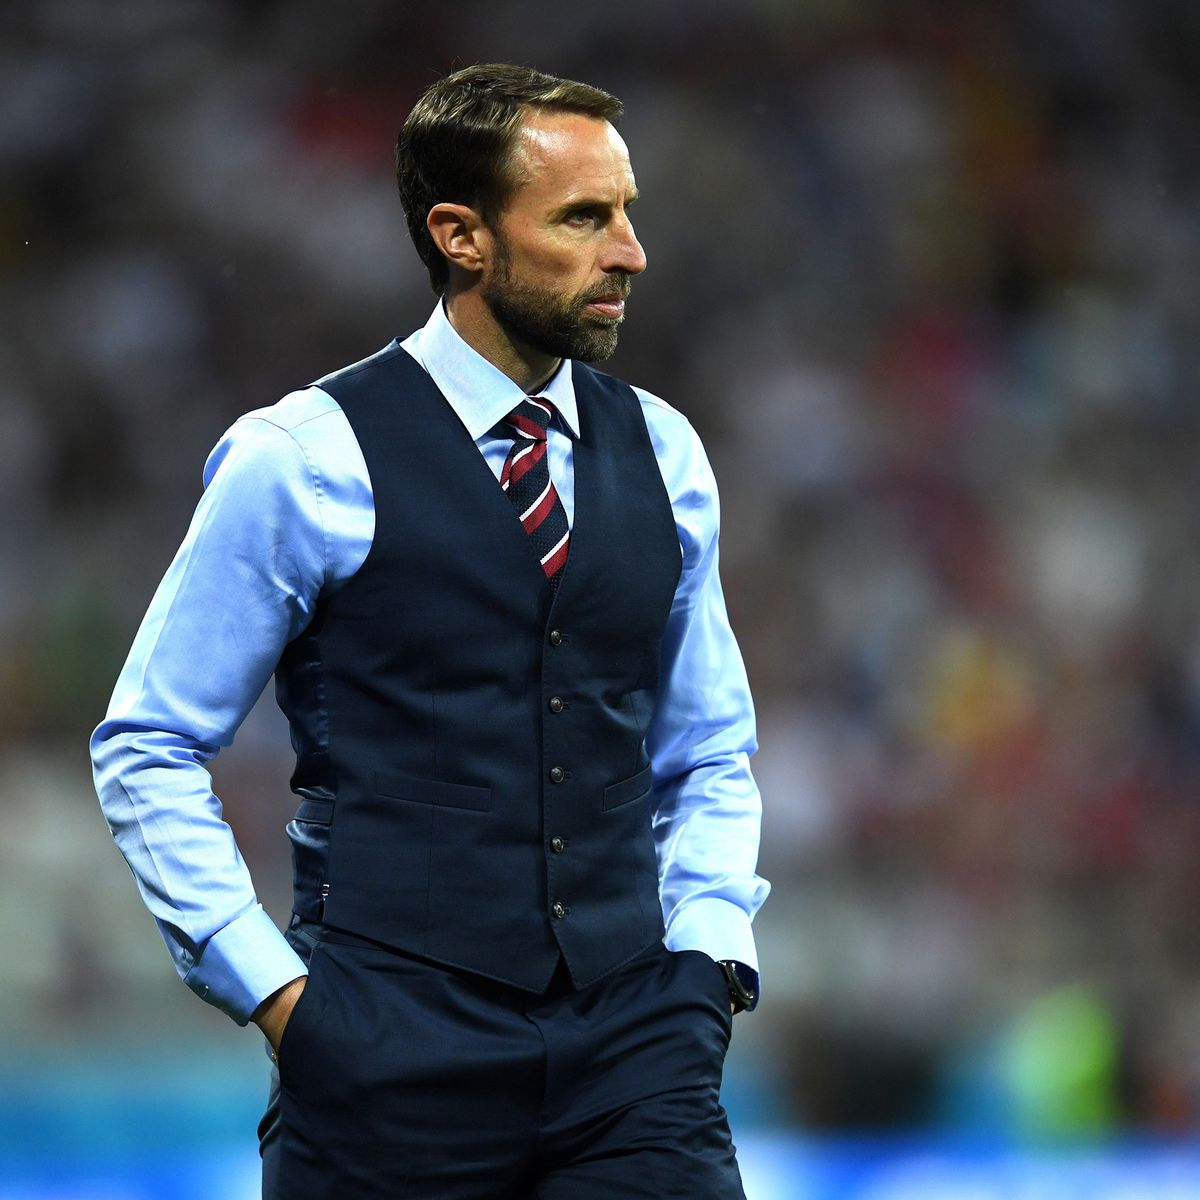 definitive lilla Modsatte How Gareth Southgate's waistcoat became England's World Cup fashion hit